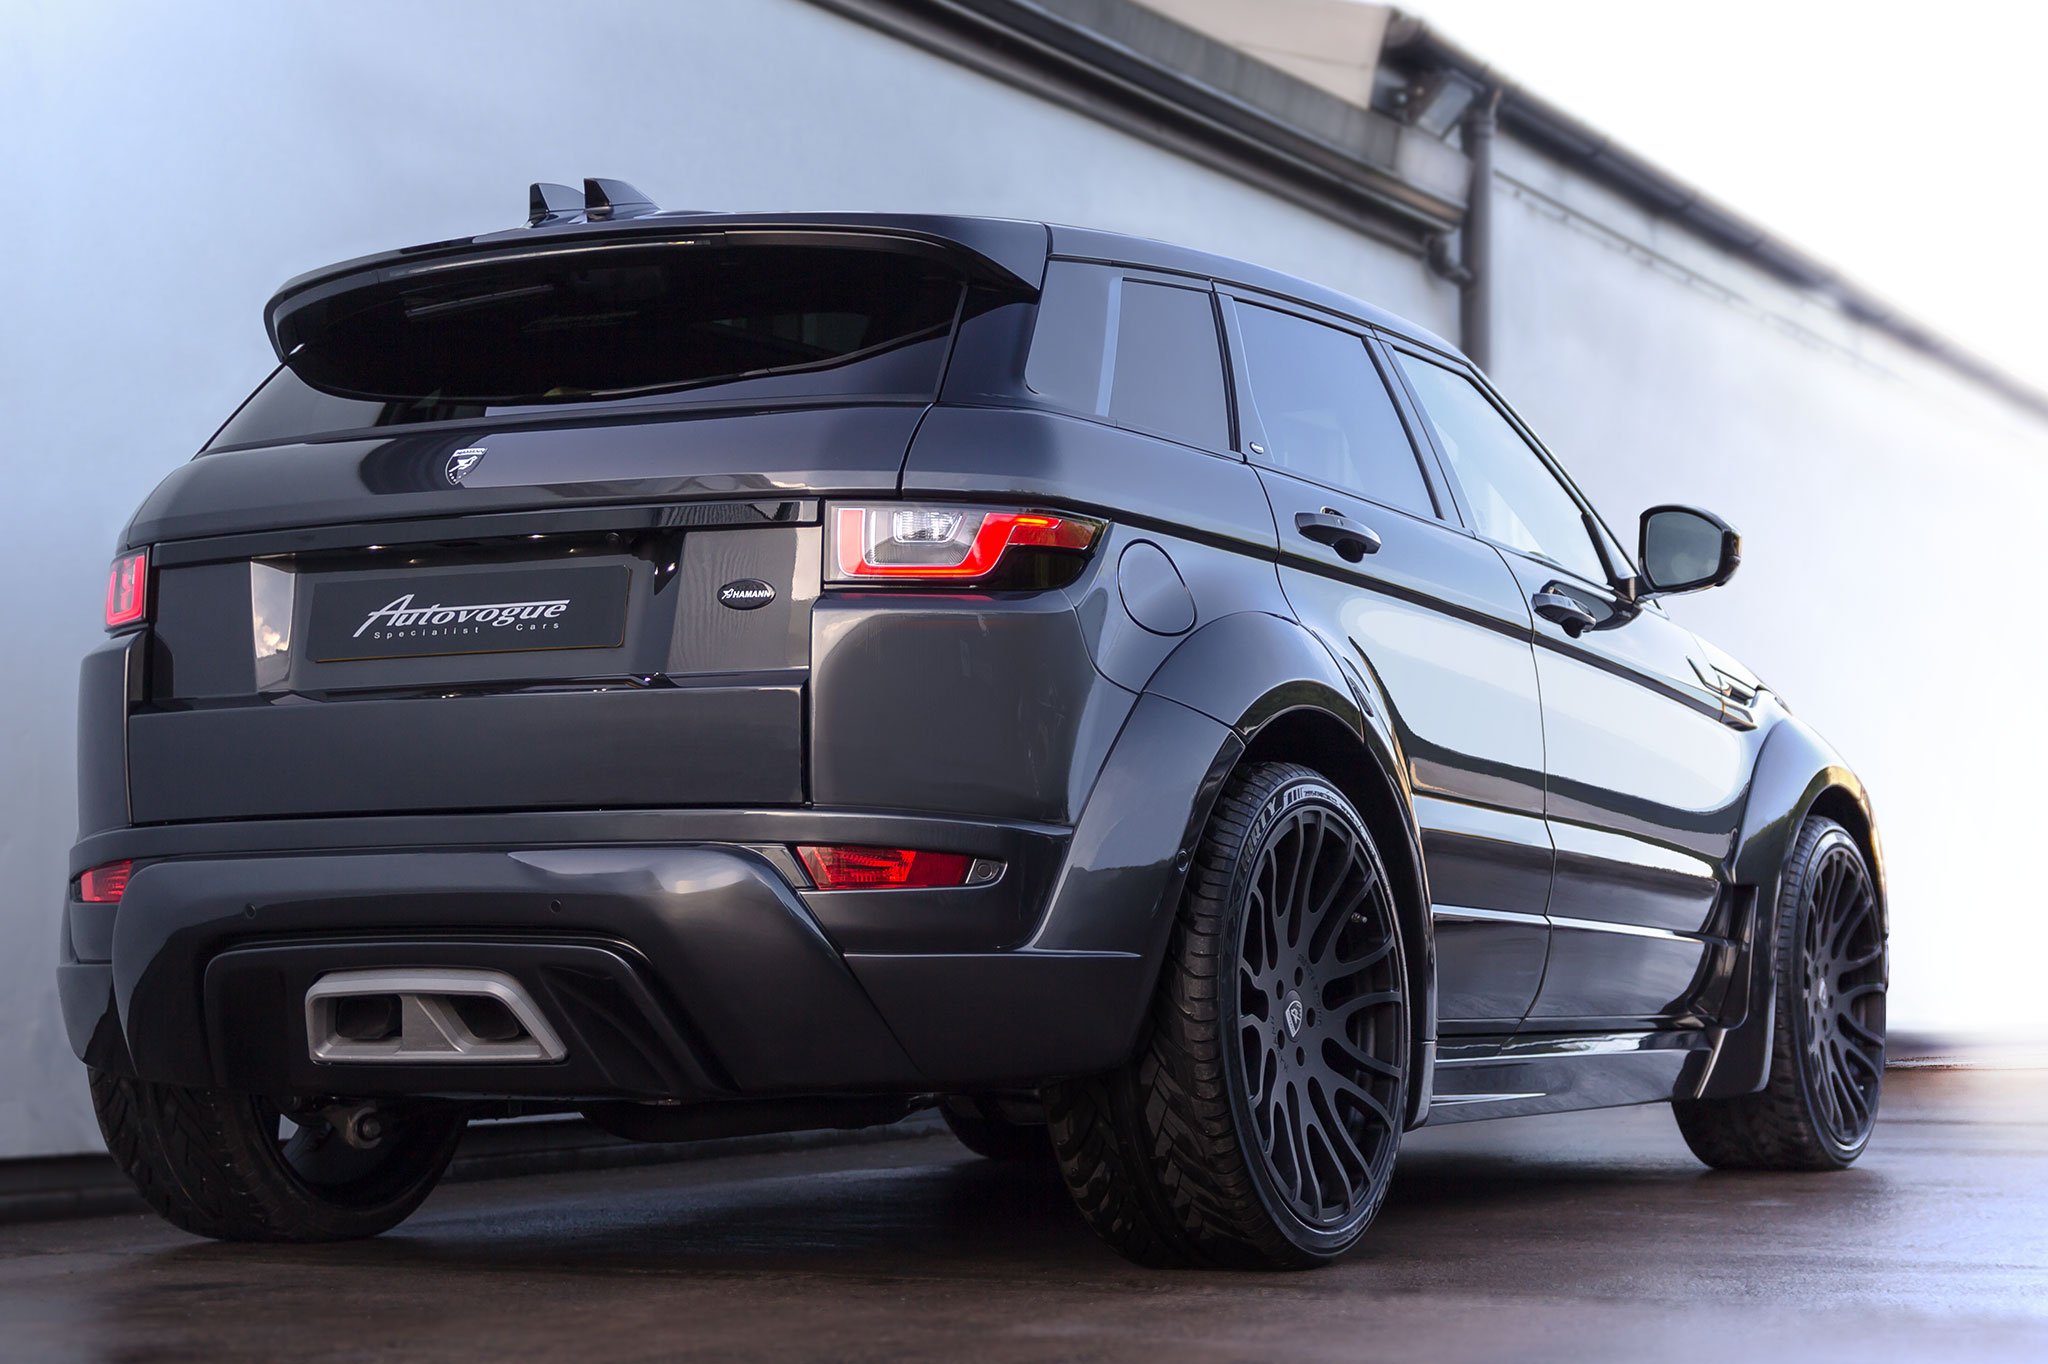 Check our price and buy Hamann wide body kit set for Land Rover Range Rover Evoque